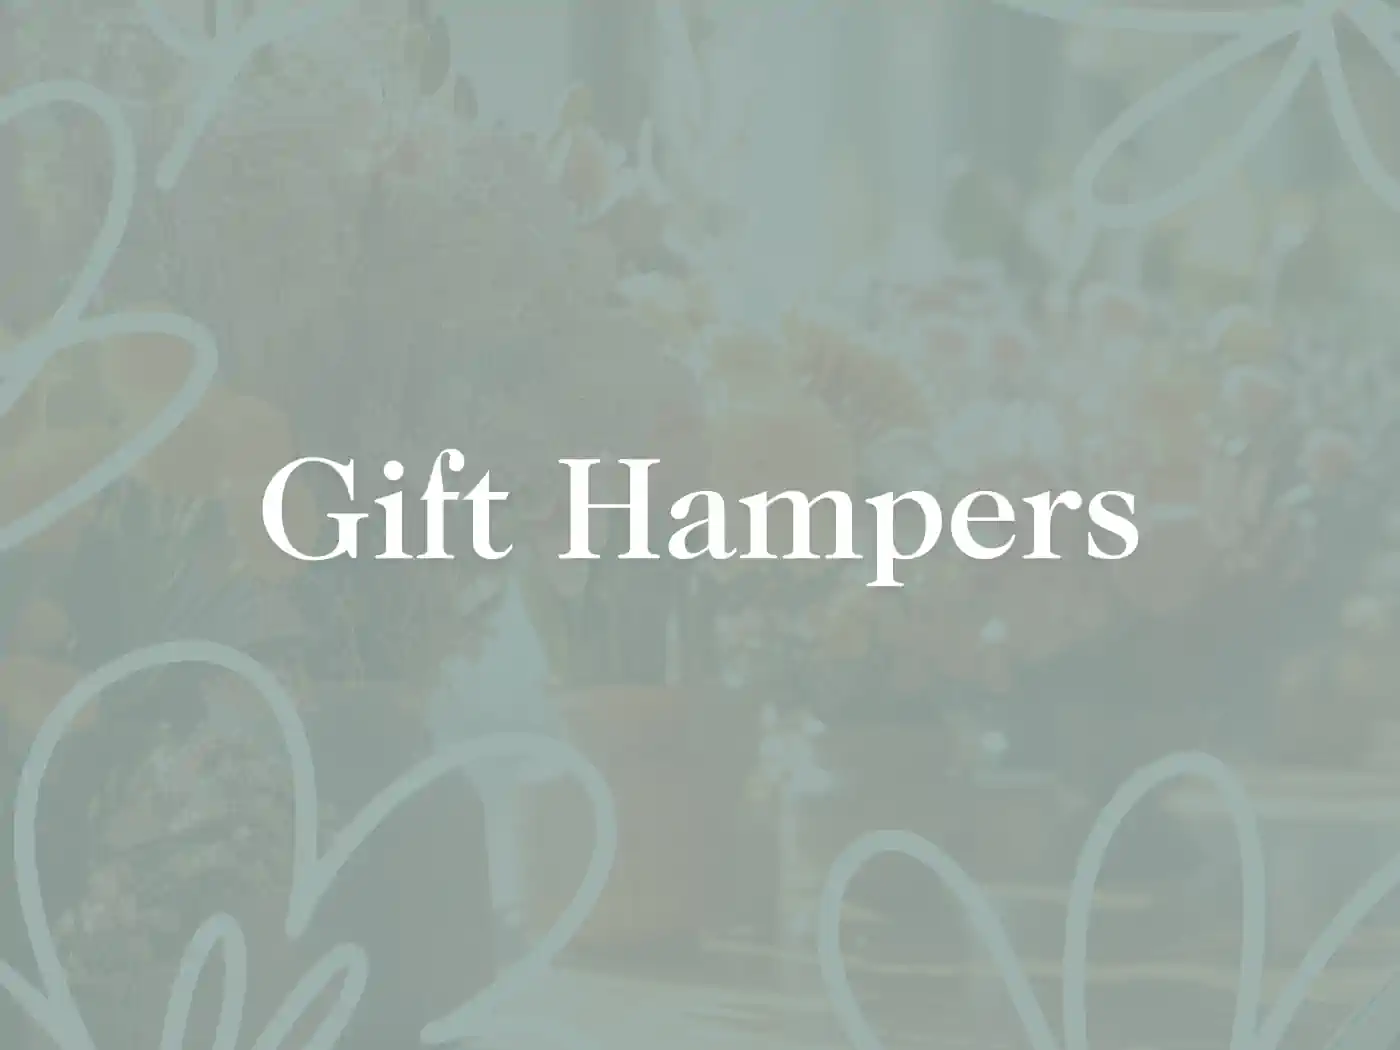 Text overlay on a delicate floral background with the words "Gift Hampers" - Fabulous Flowers and Gifts, Gift Hampers Collection.